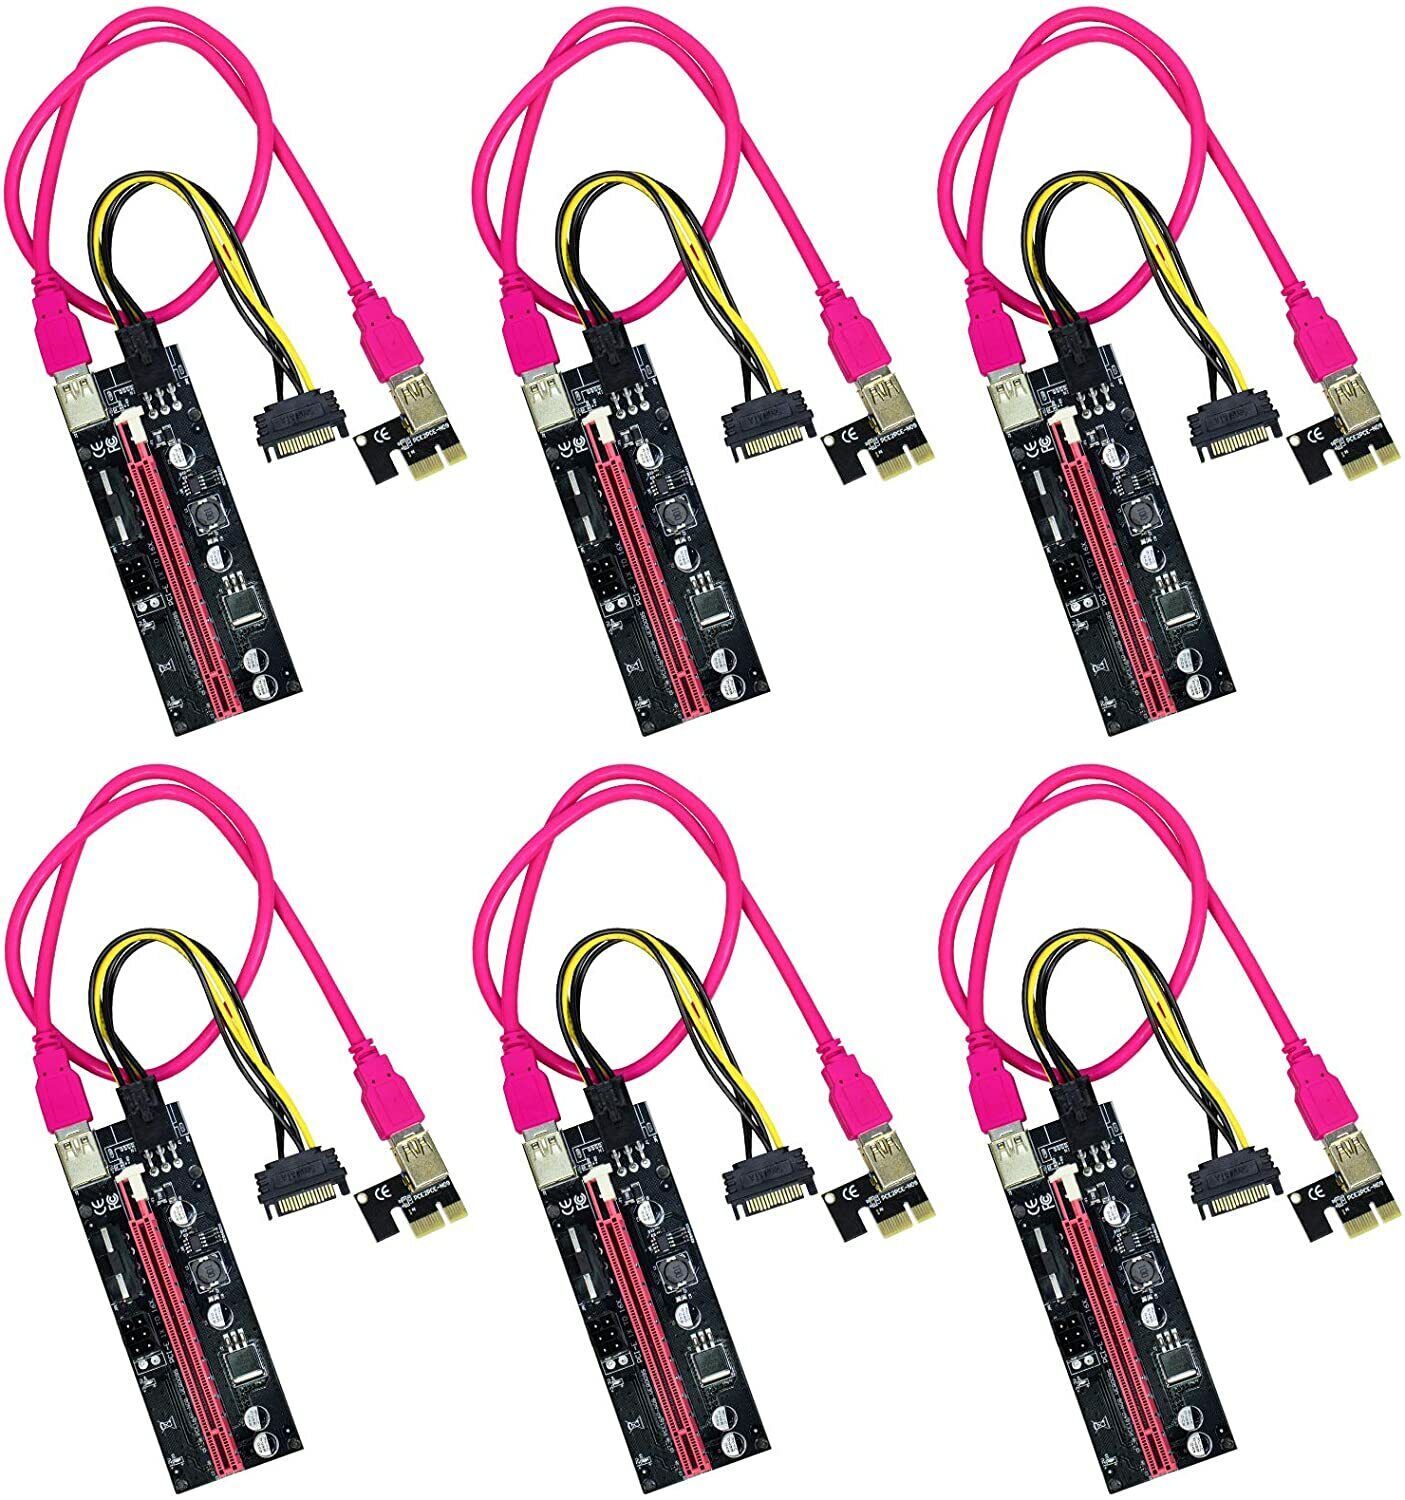 NEW 6 Pack VER009S PCI-E Riser Card for Bitcoin GPU Mining Powered Riser Adapter